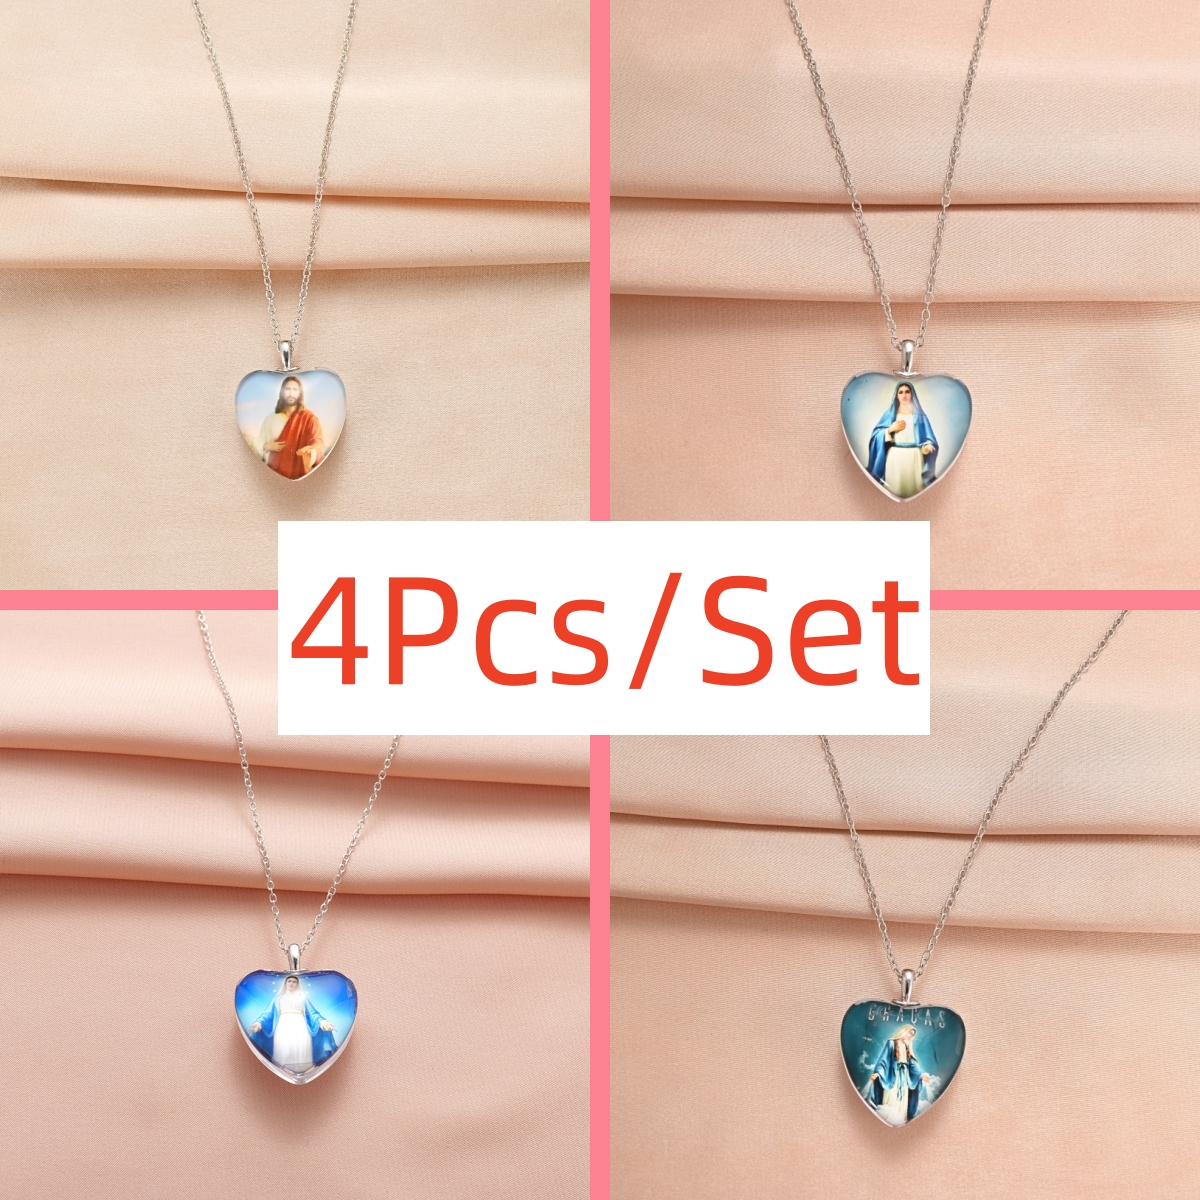 4pcs Trendy Goddess Heart-shaped Necklaces, Creative Pendant Necklace, Cute  Necklace, Party Jewelry, Holiday Birthday Gift For Friends Family